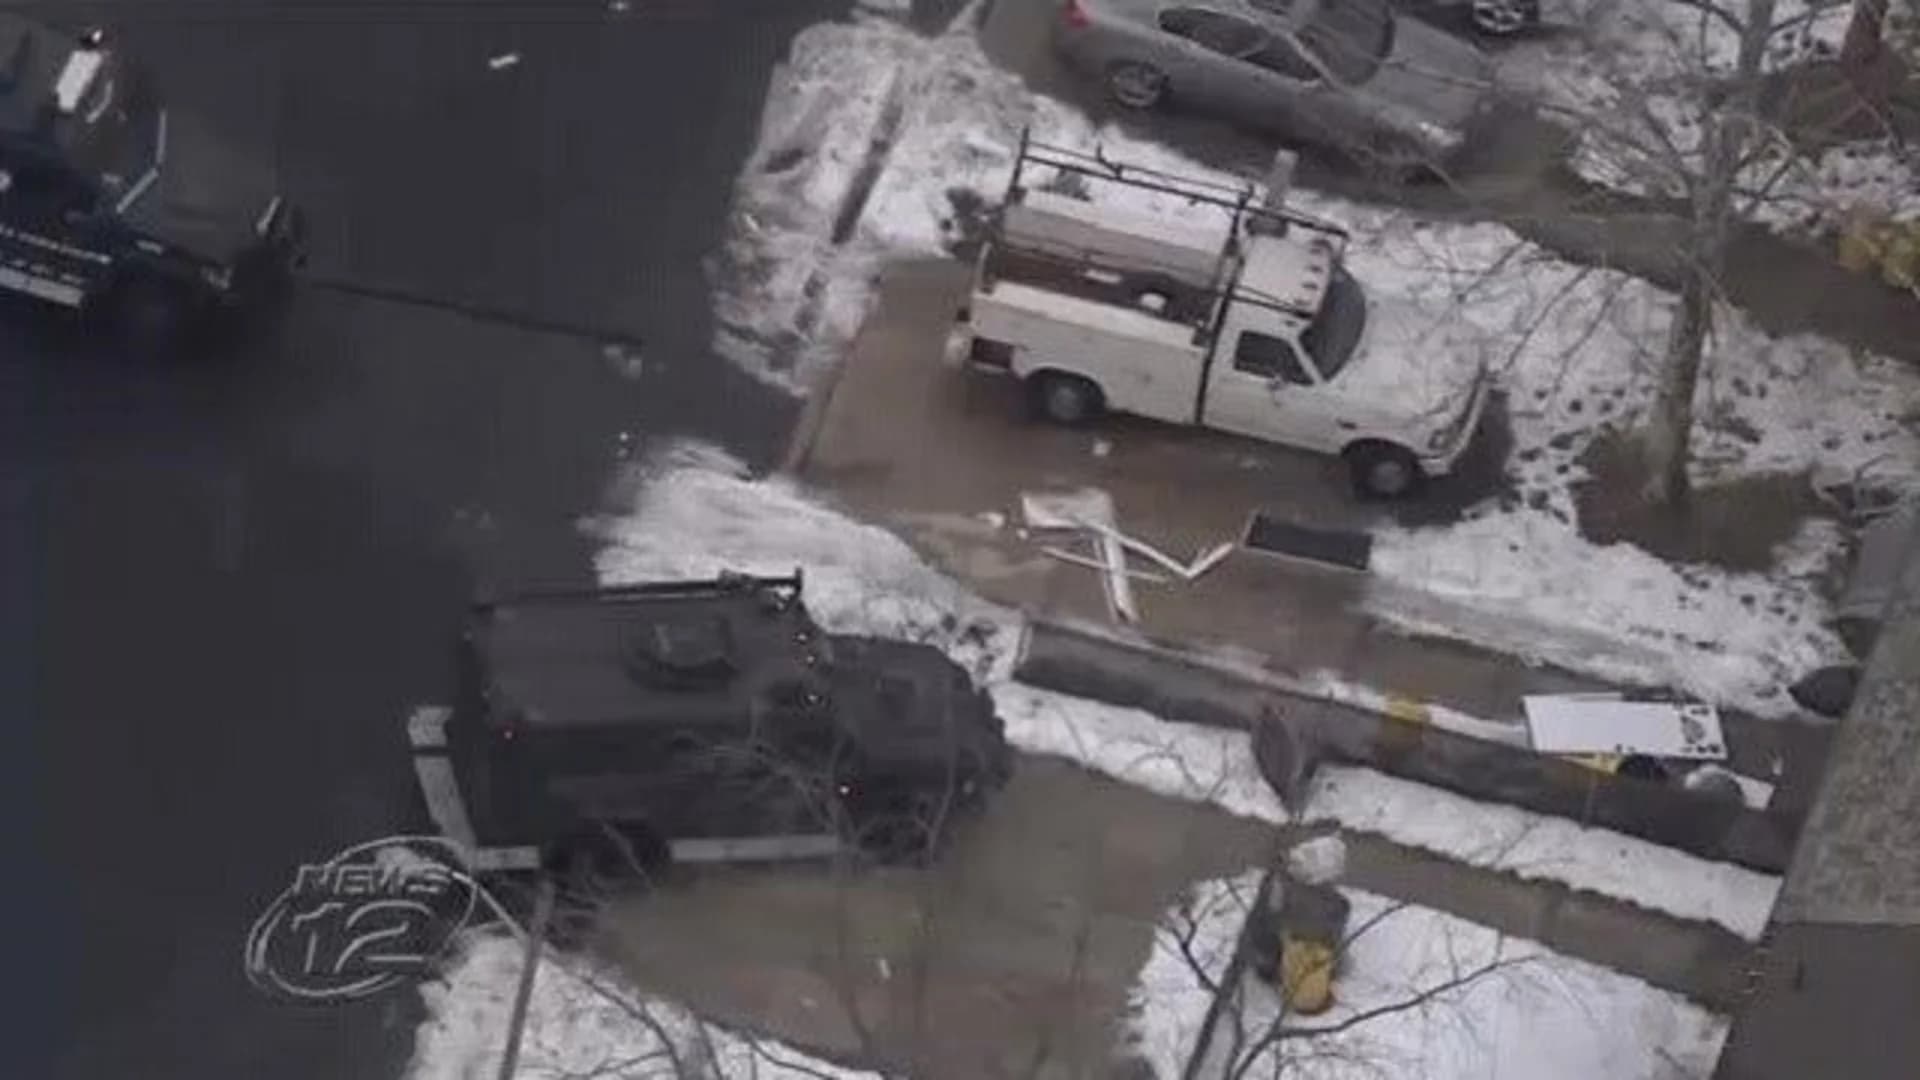 12-hour standoff ends in southern NJ; suspect found dead